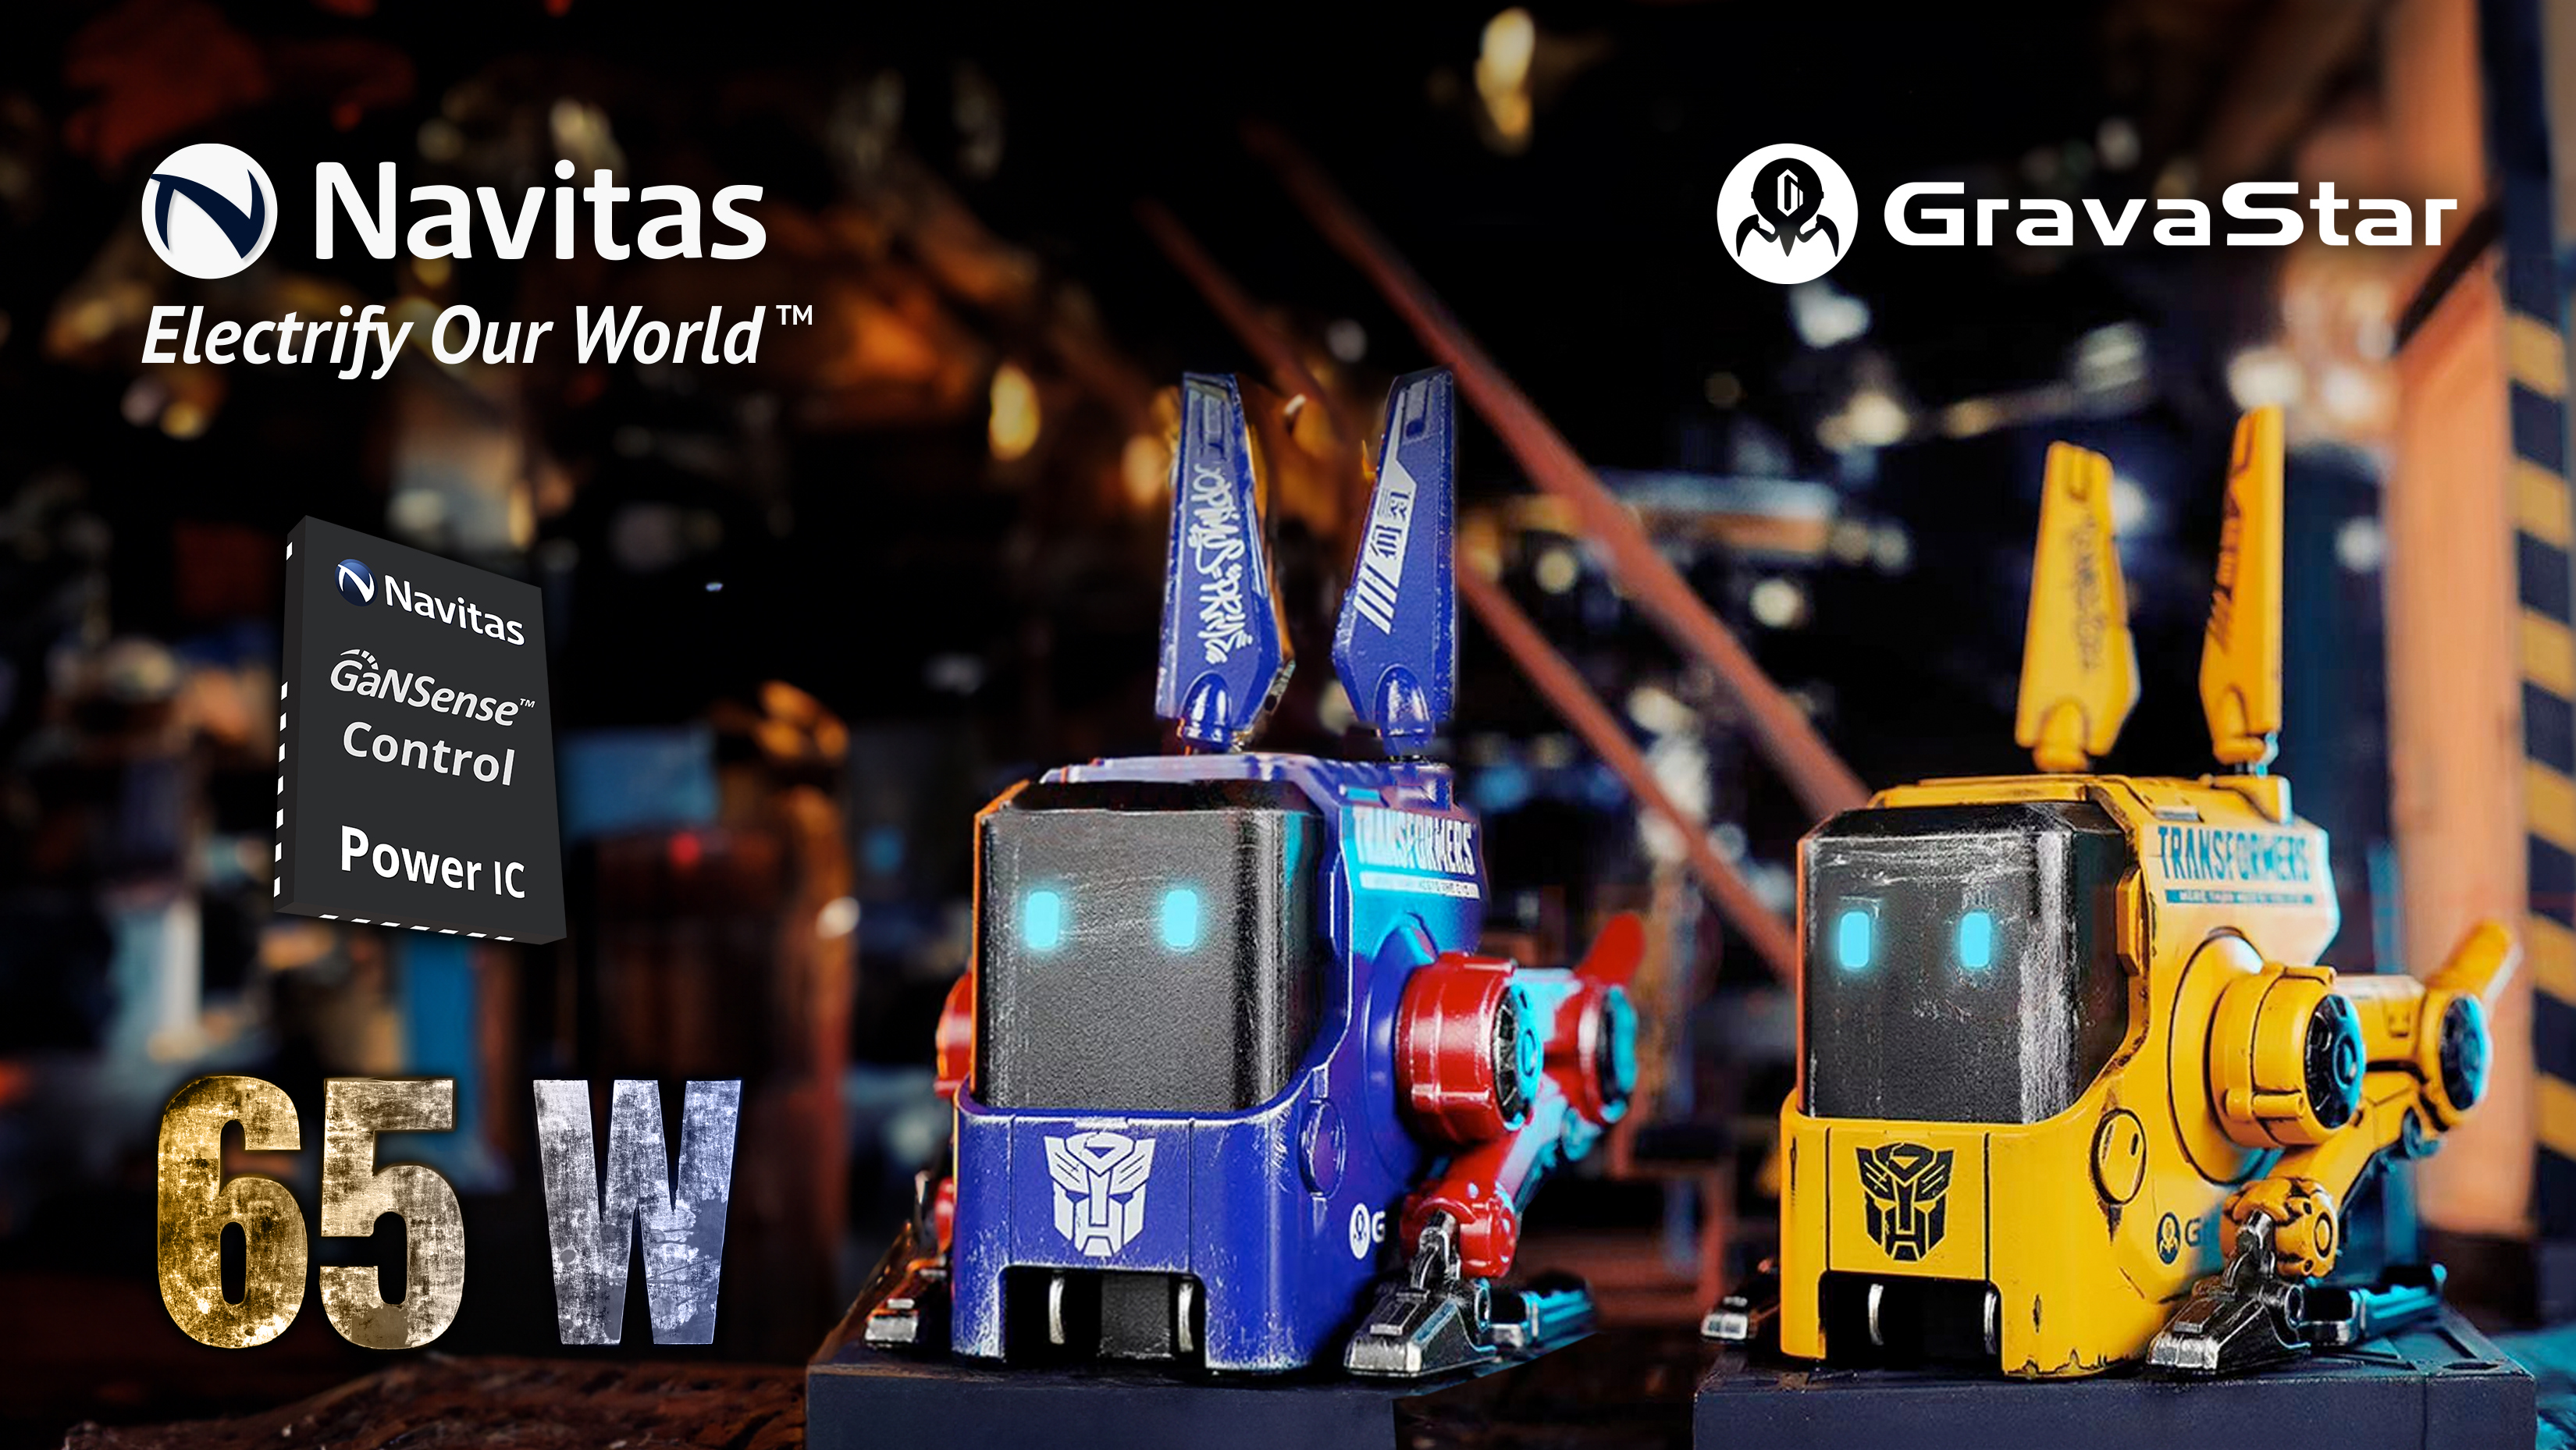 Transform your charging game, with Optimus Prime(TM) and Bumblebee(TM)!